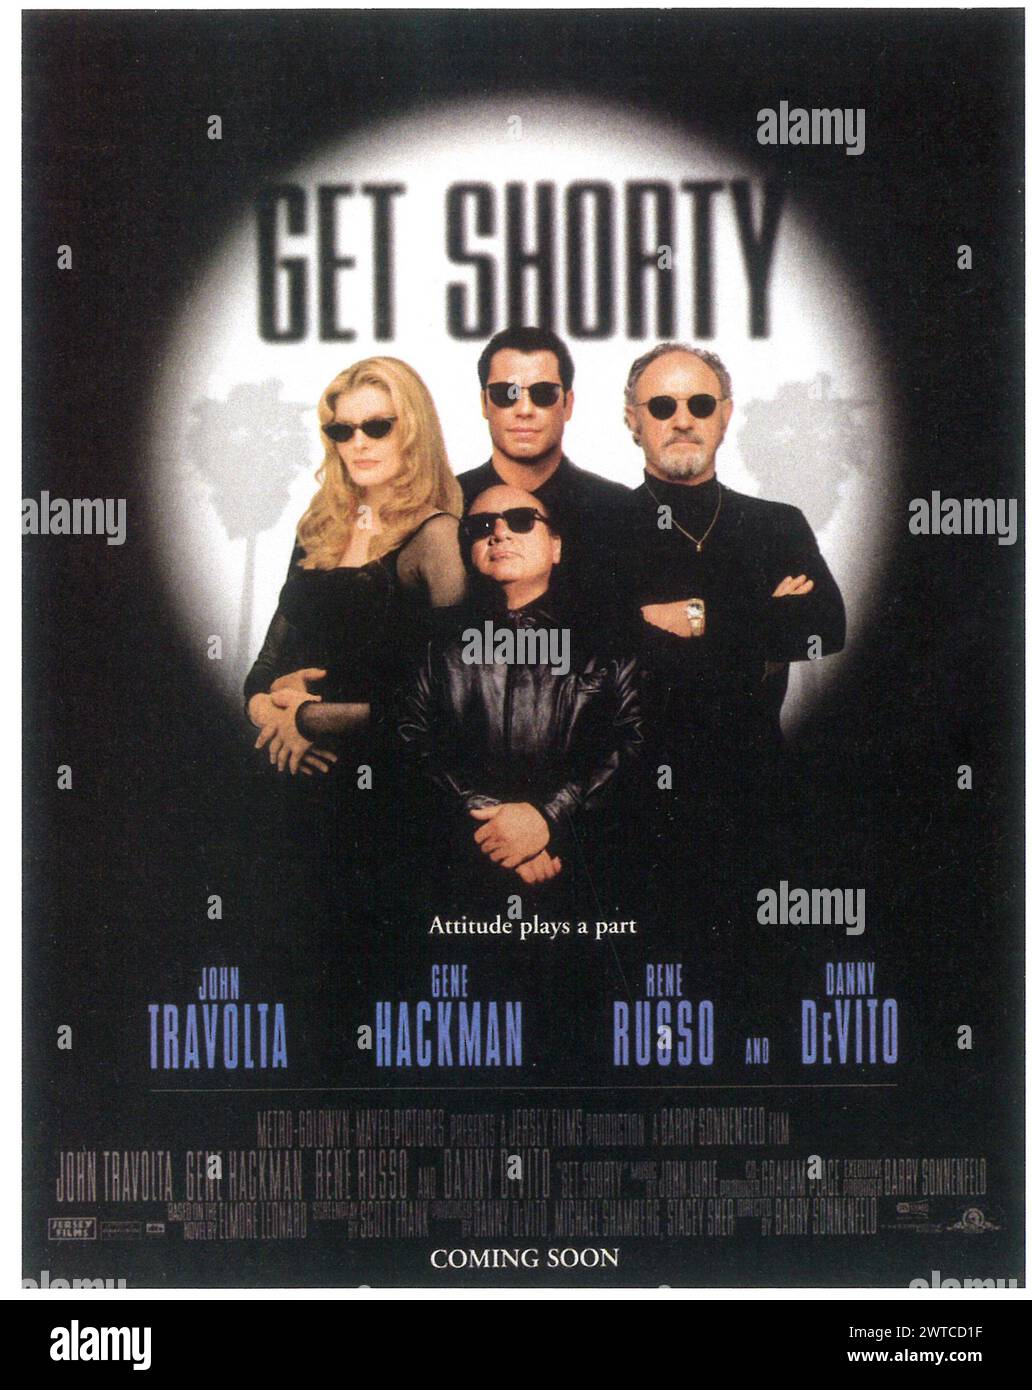 1995 Get Shorty film poster - gangster comedy film directed by Barry Sonnenfeld Stock Photo